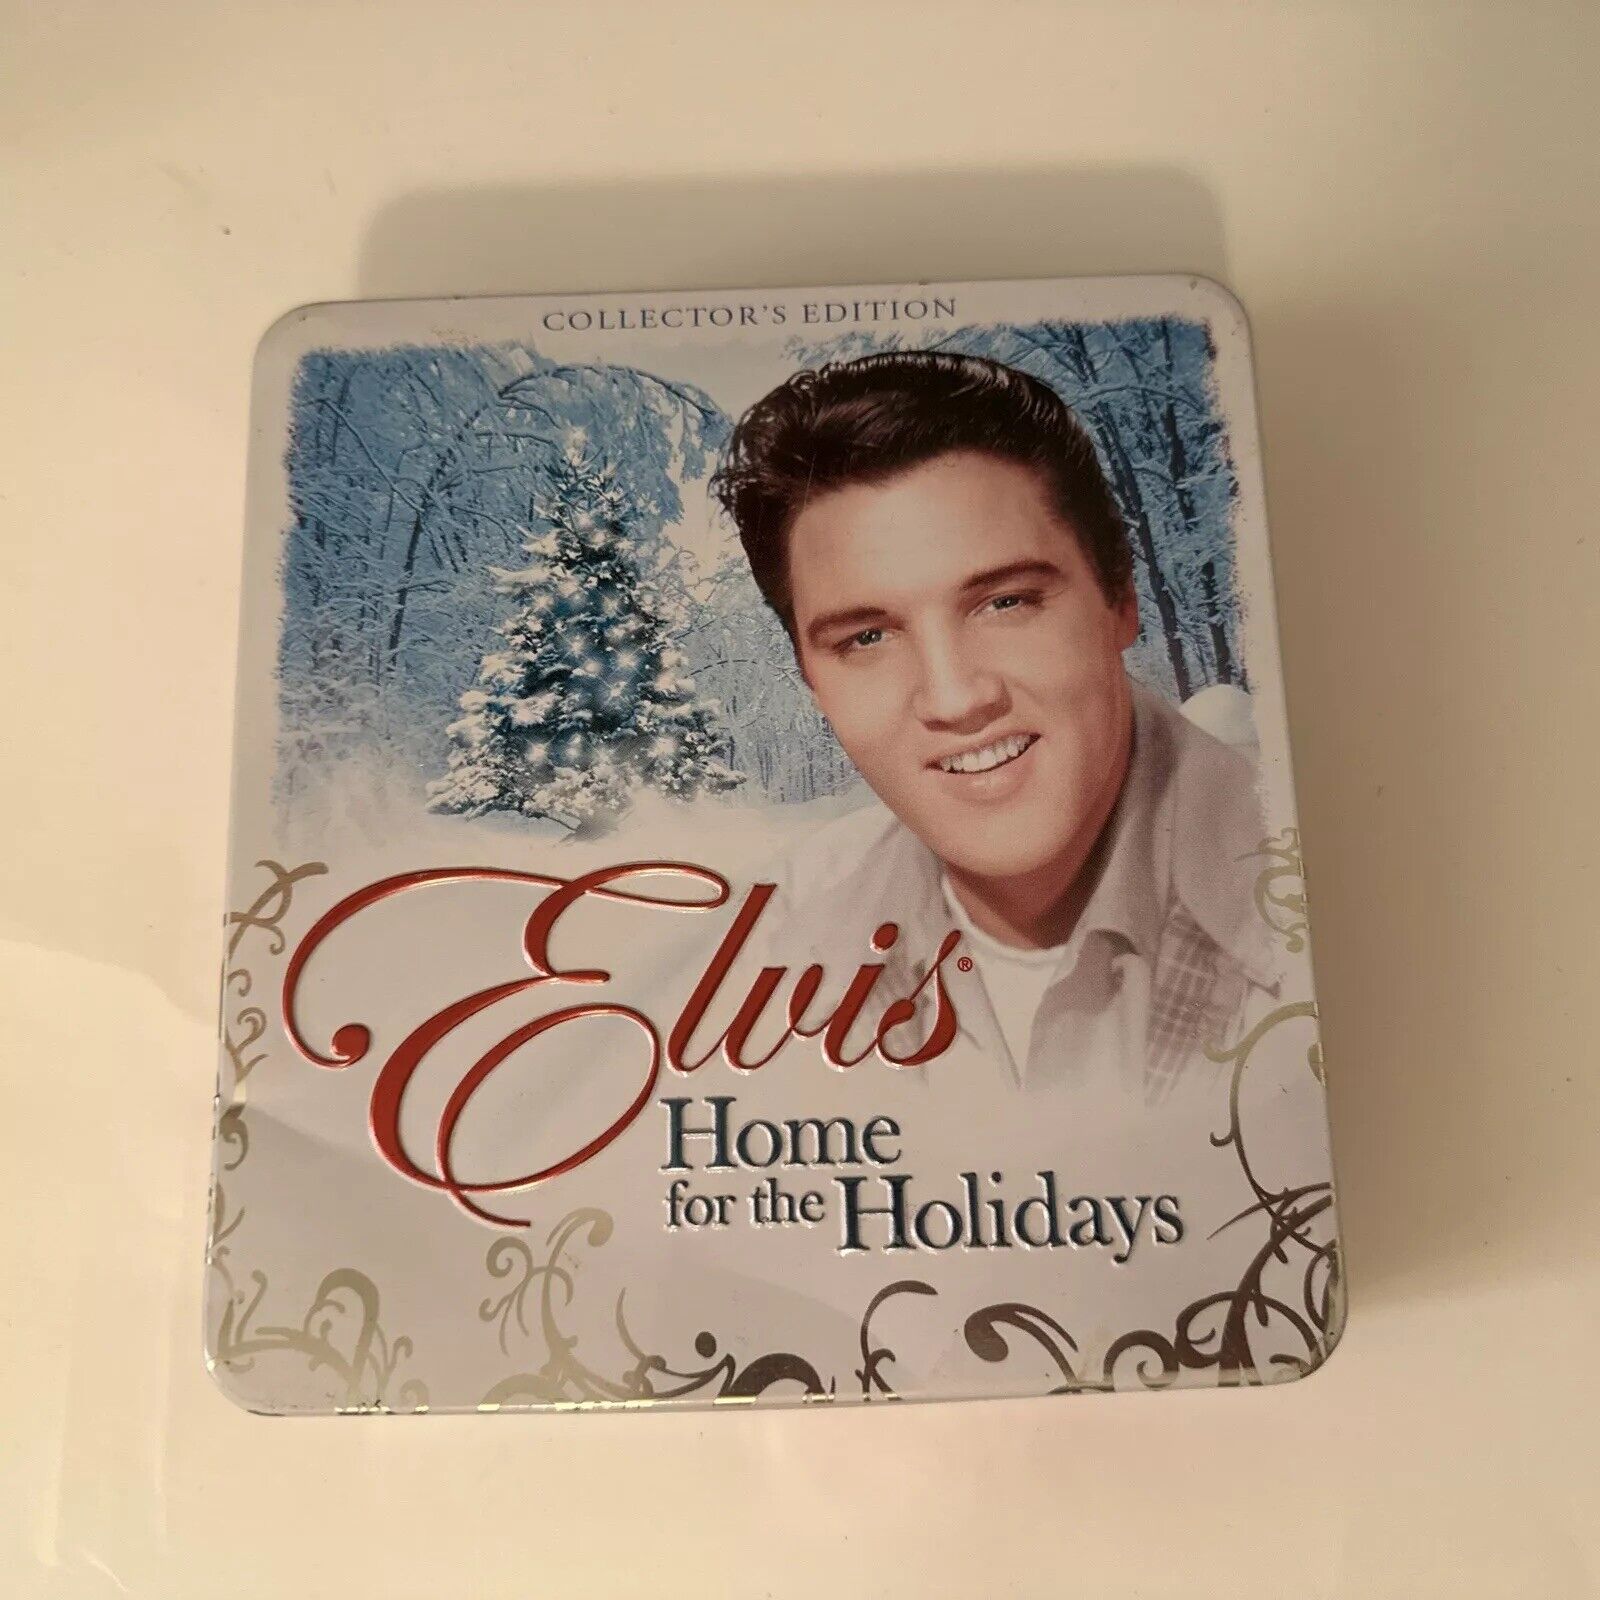 Home for the Holidays - Audio CD By Elvis Presley  Candle Guitar Postcards Set